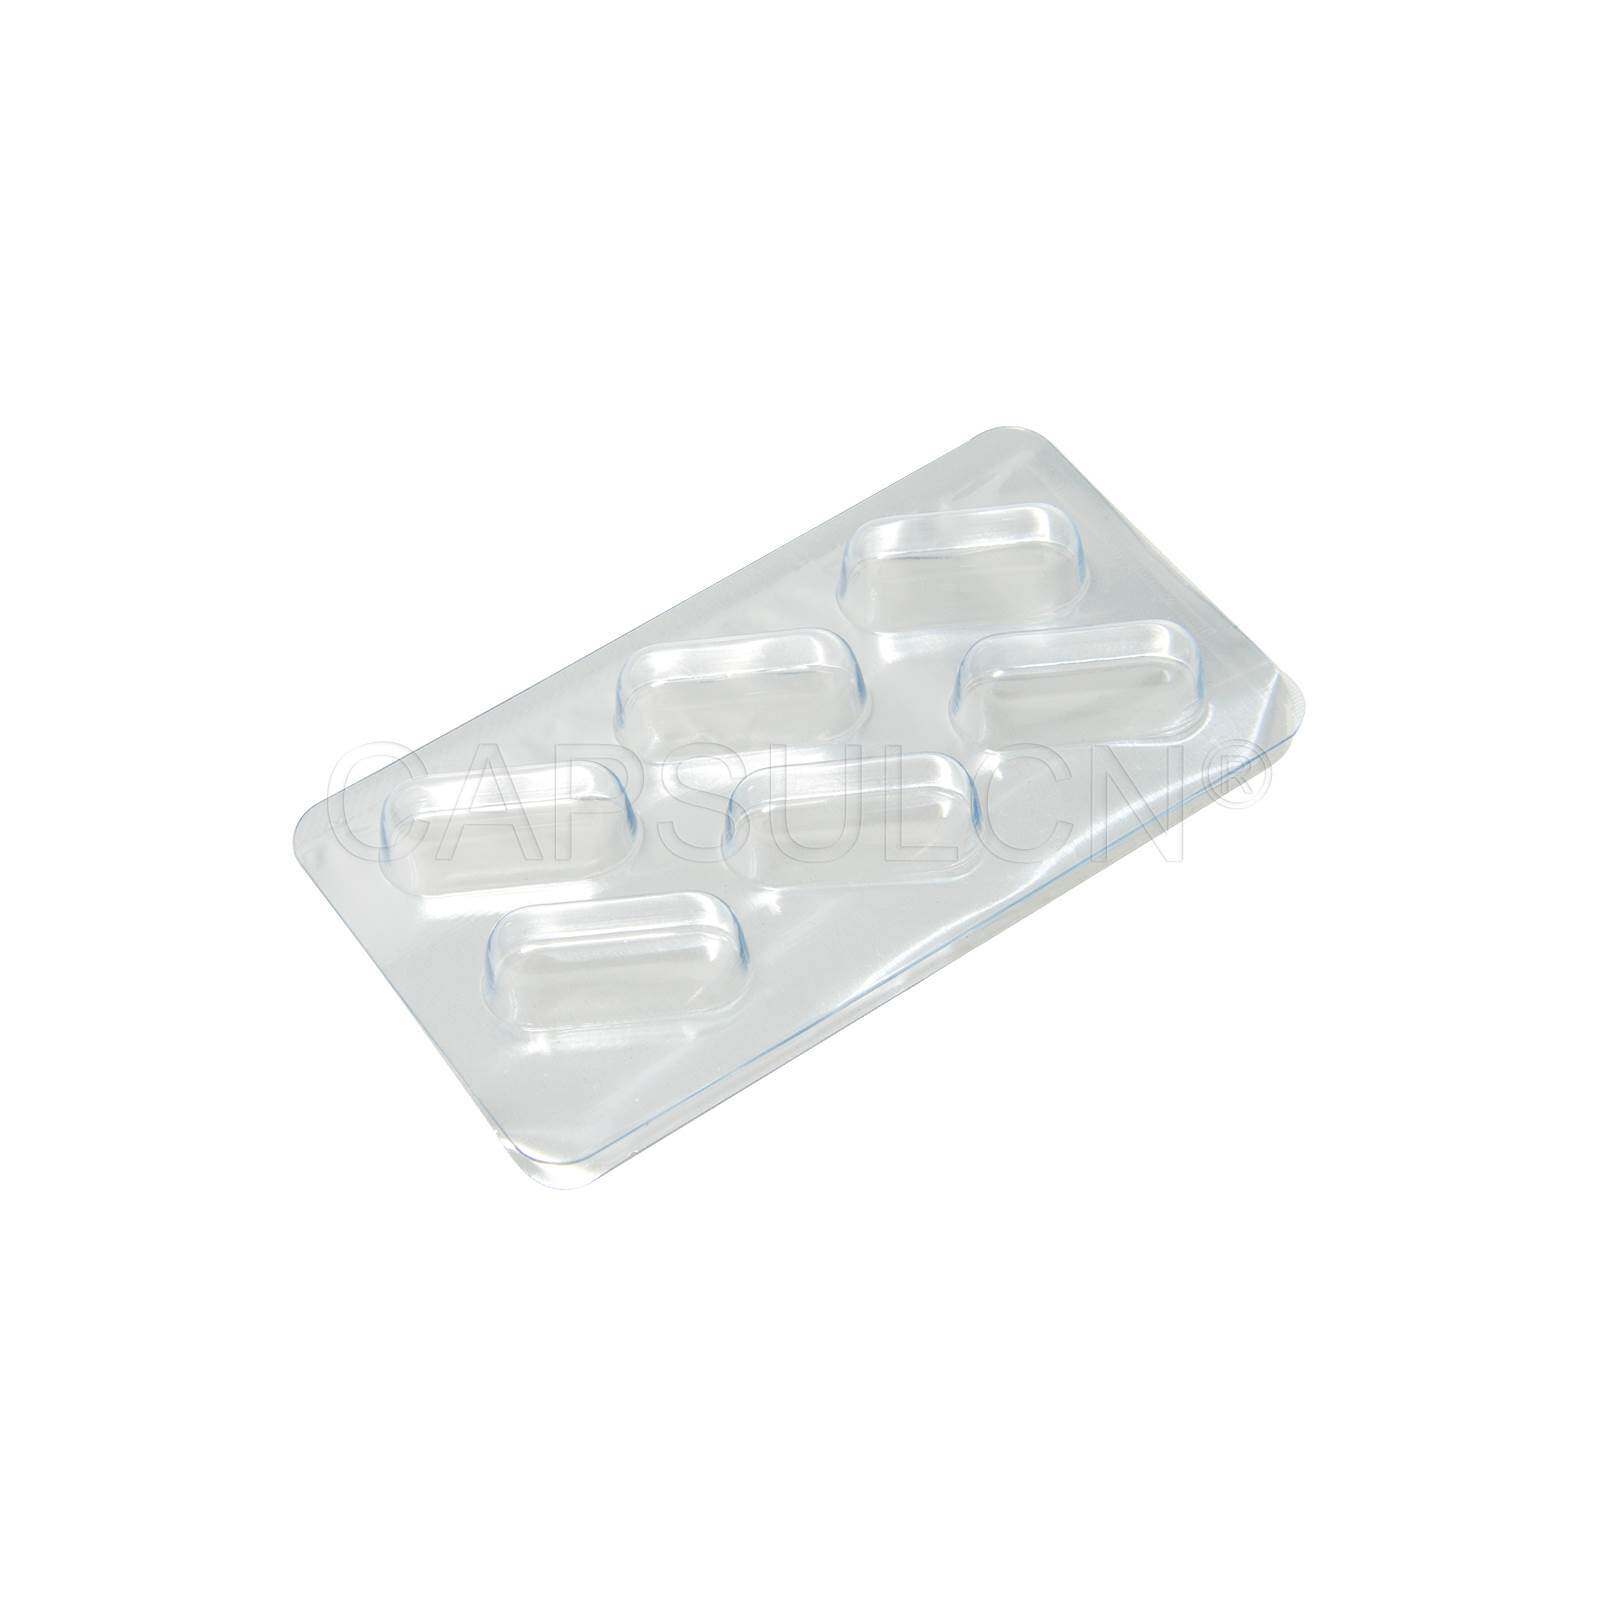 28 Day Medication Cold Seal Blister Pack XL, EZ Dose 2pc. Refill Set of 6,  Pill Sorter, Easy to Use. by Pillthing Inc. - Walmart.com